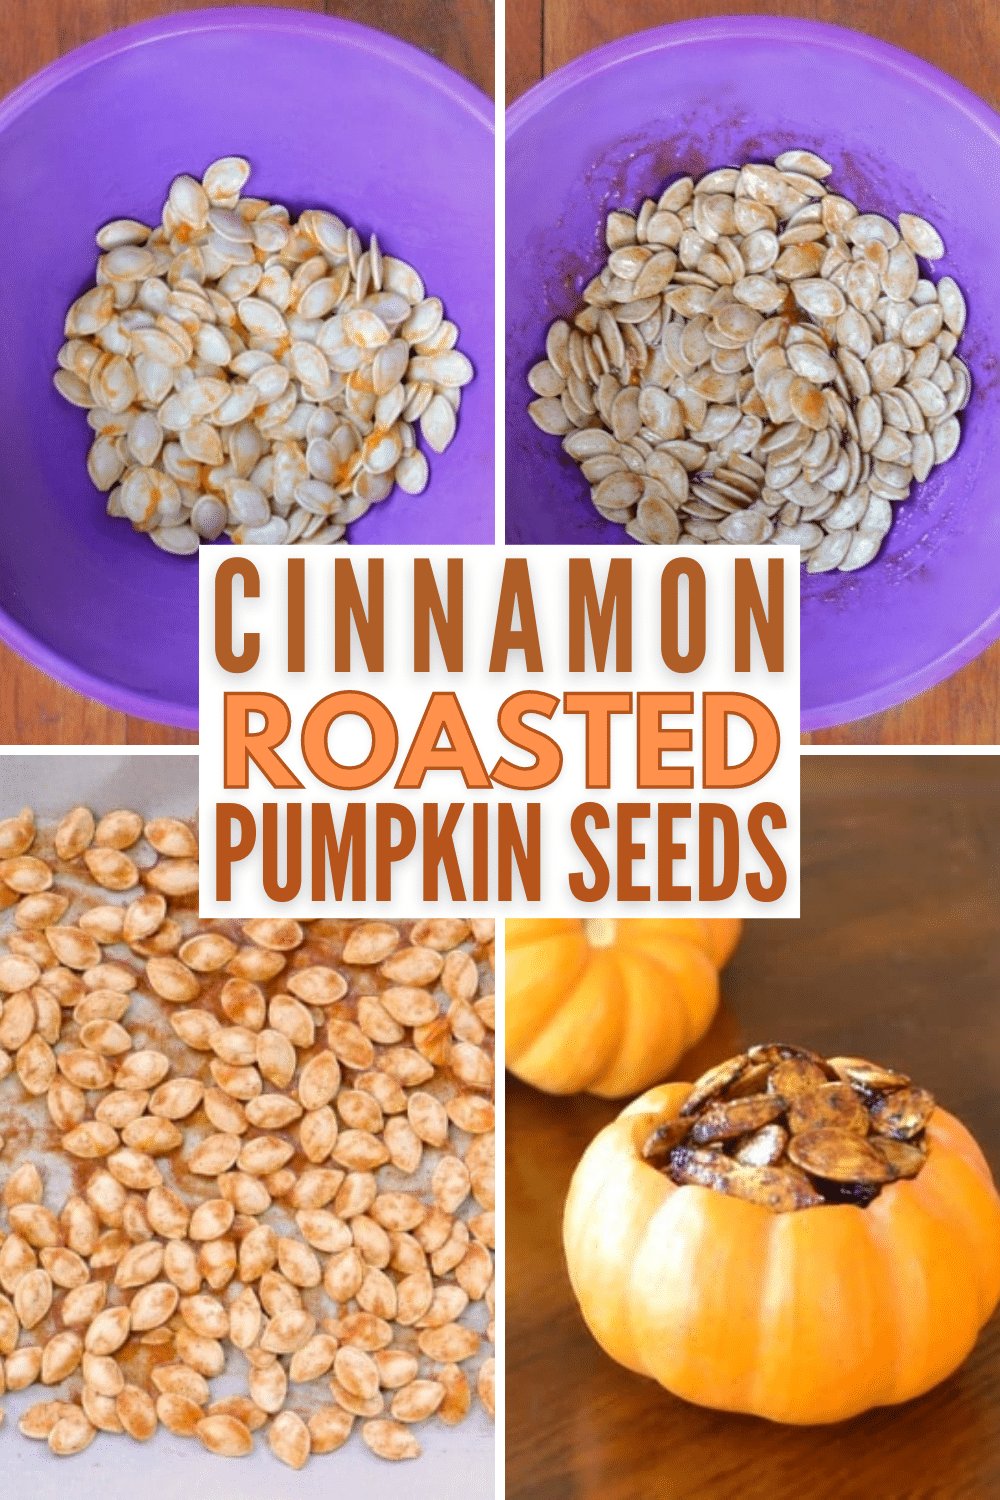 Deliciously spiced with cinnamon, these roasted pumpkin seeds are a delightful snack.